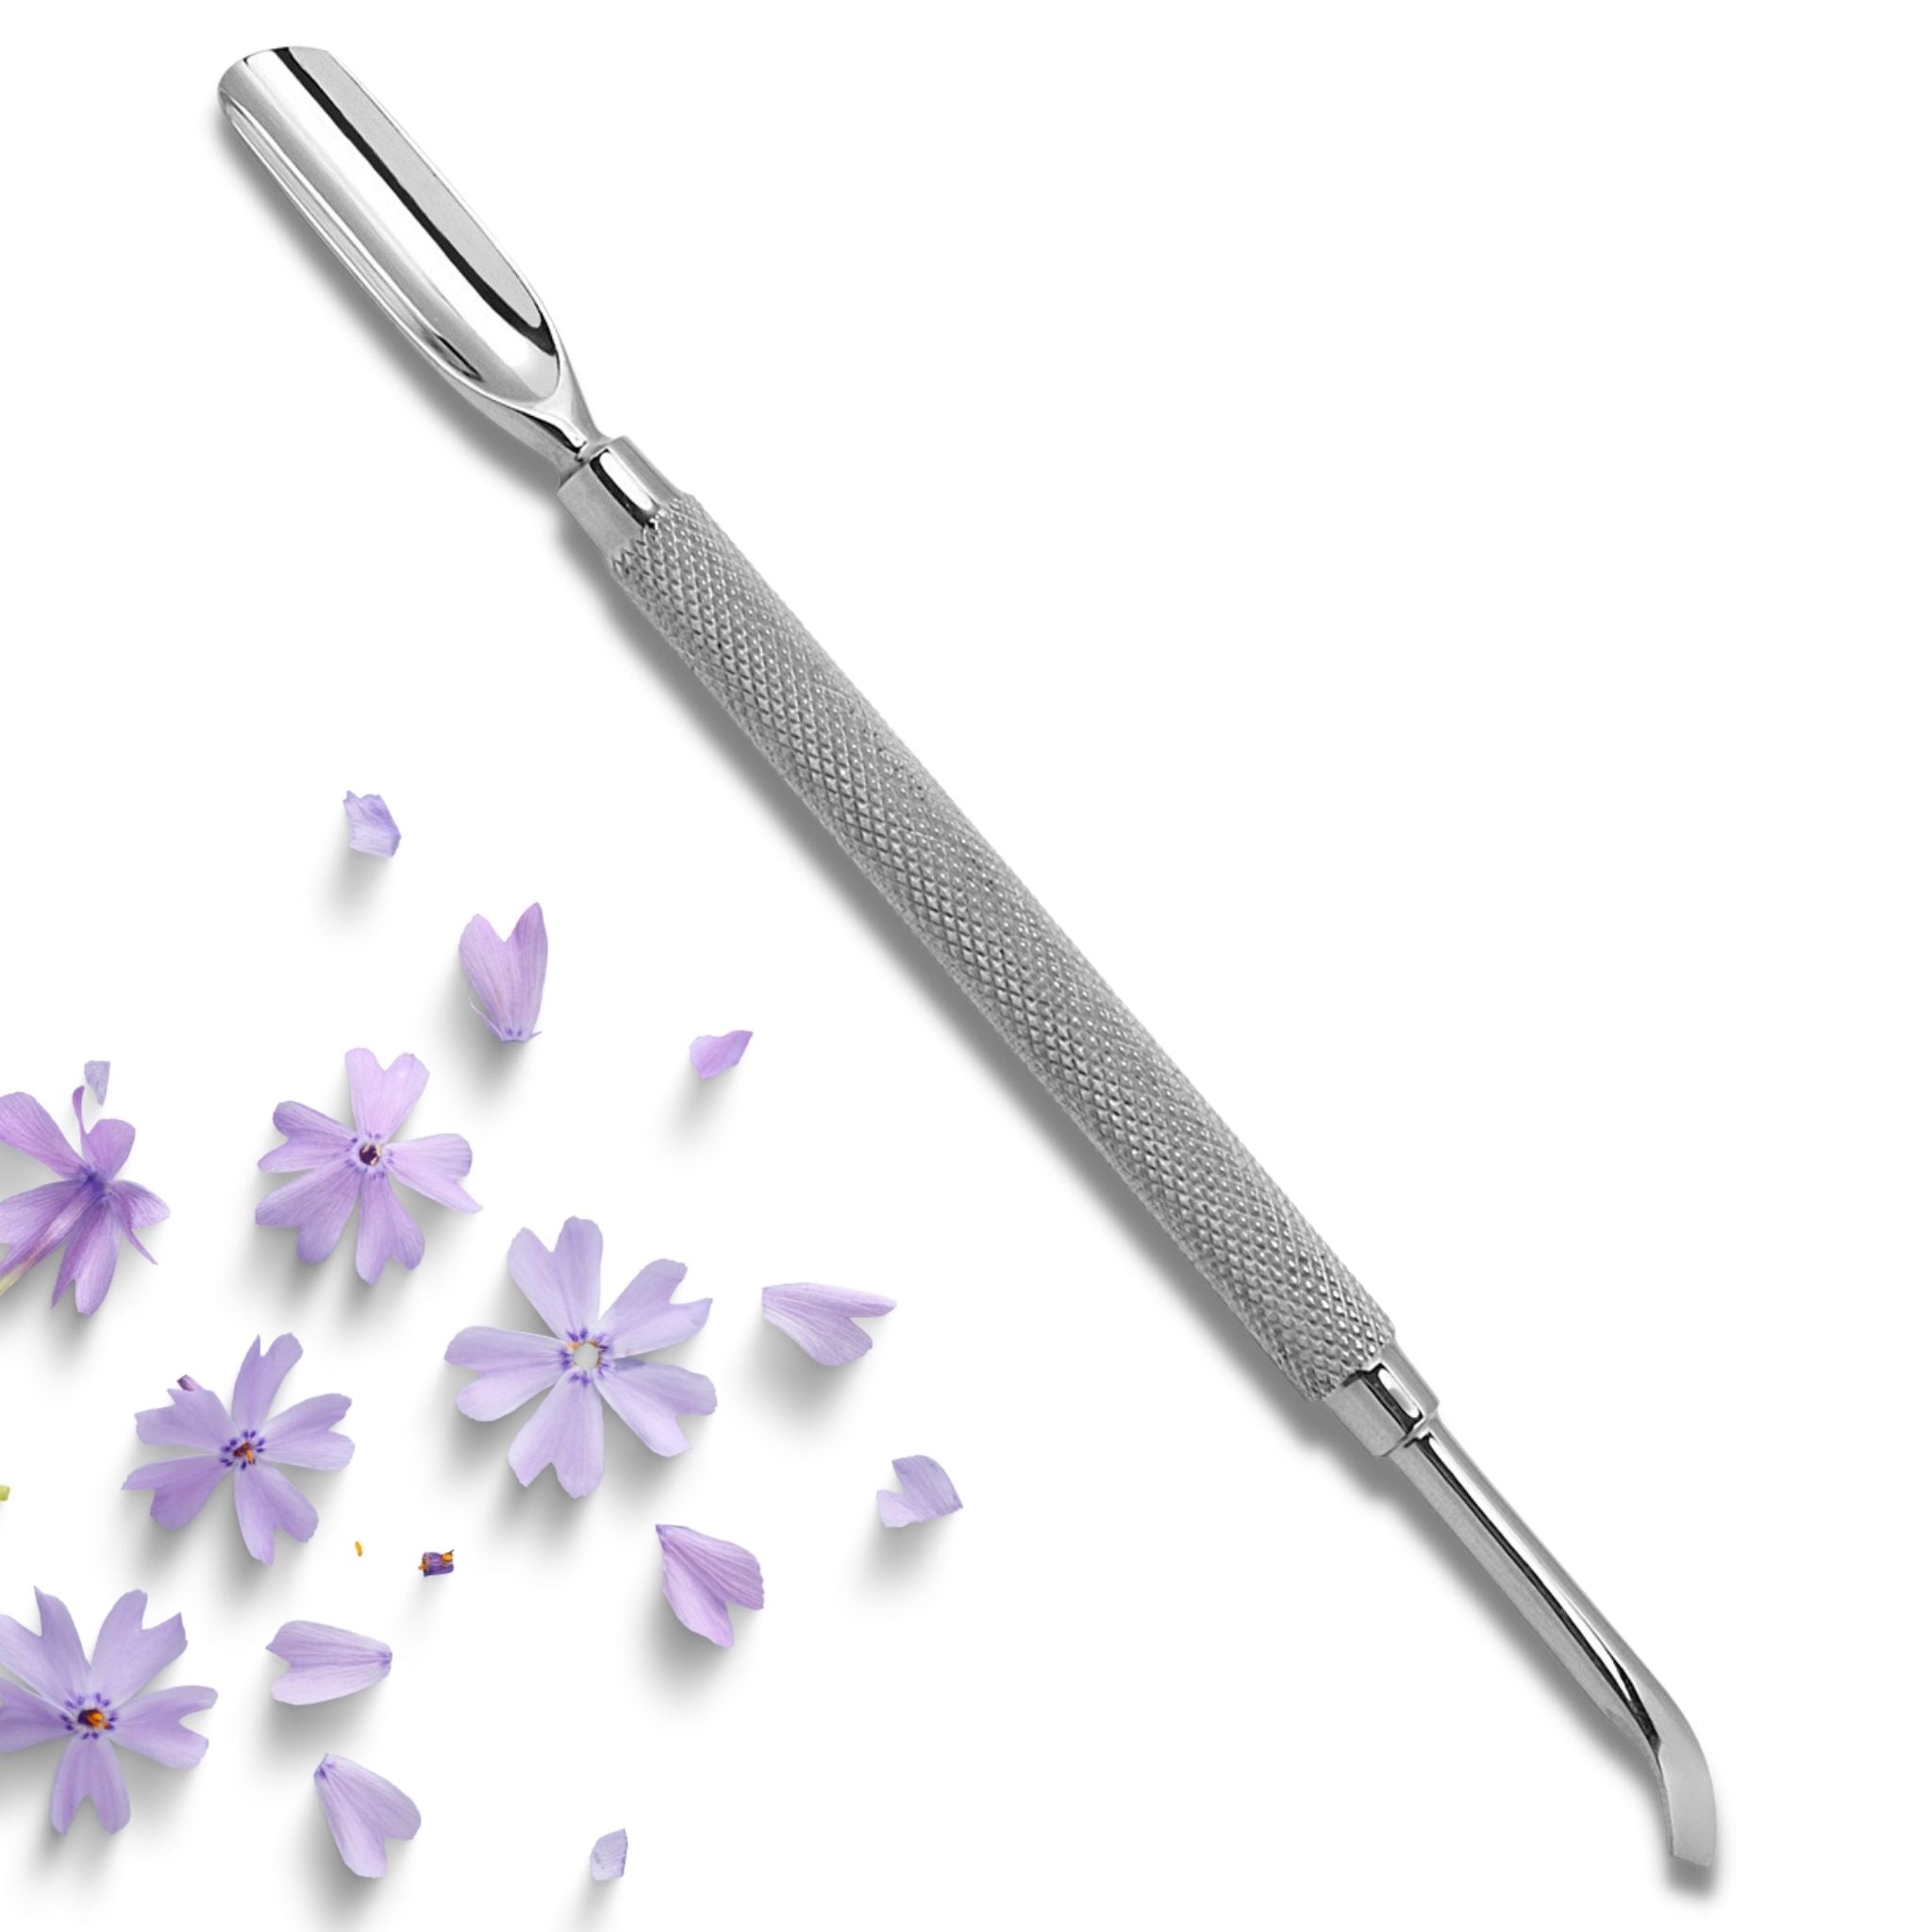 Cuticle pusher manicure tools curved end - viva instruments 